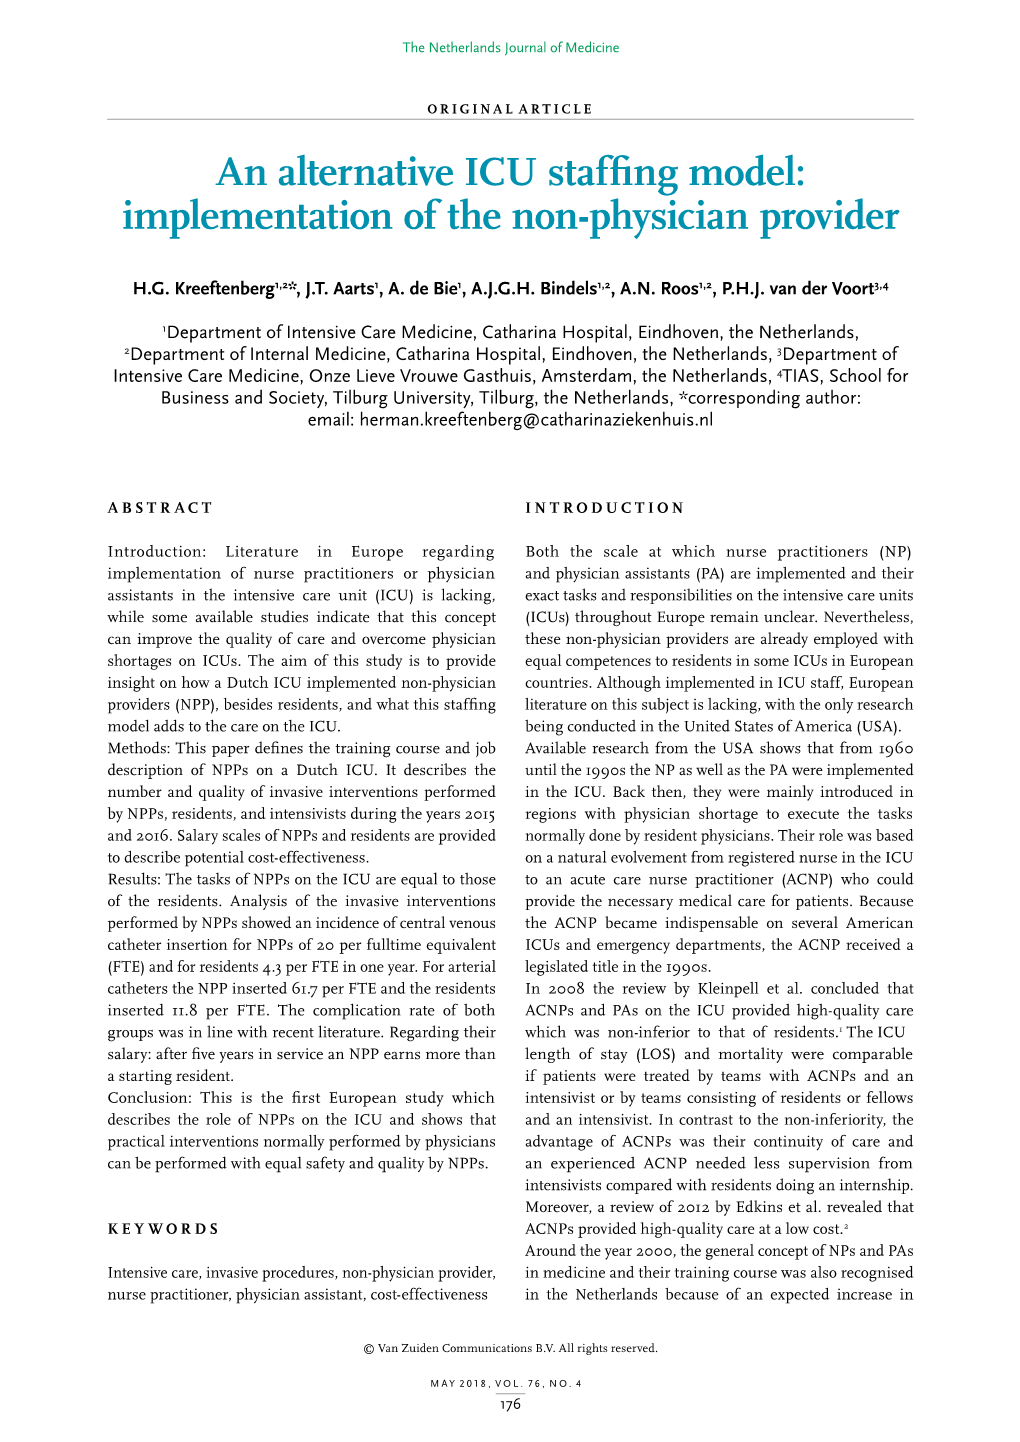 An Alternative ICU Staffing Model: Implementation of the Non-Physician Provider